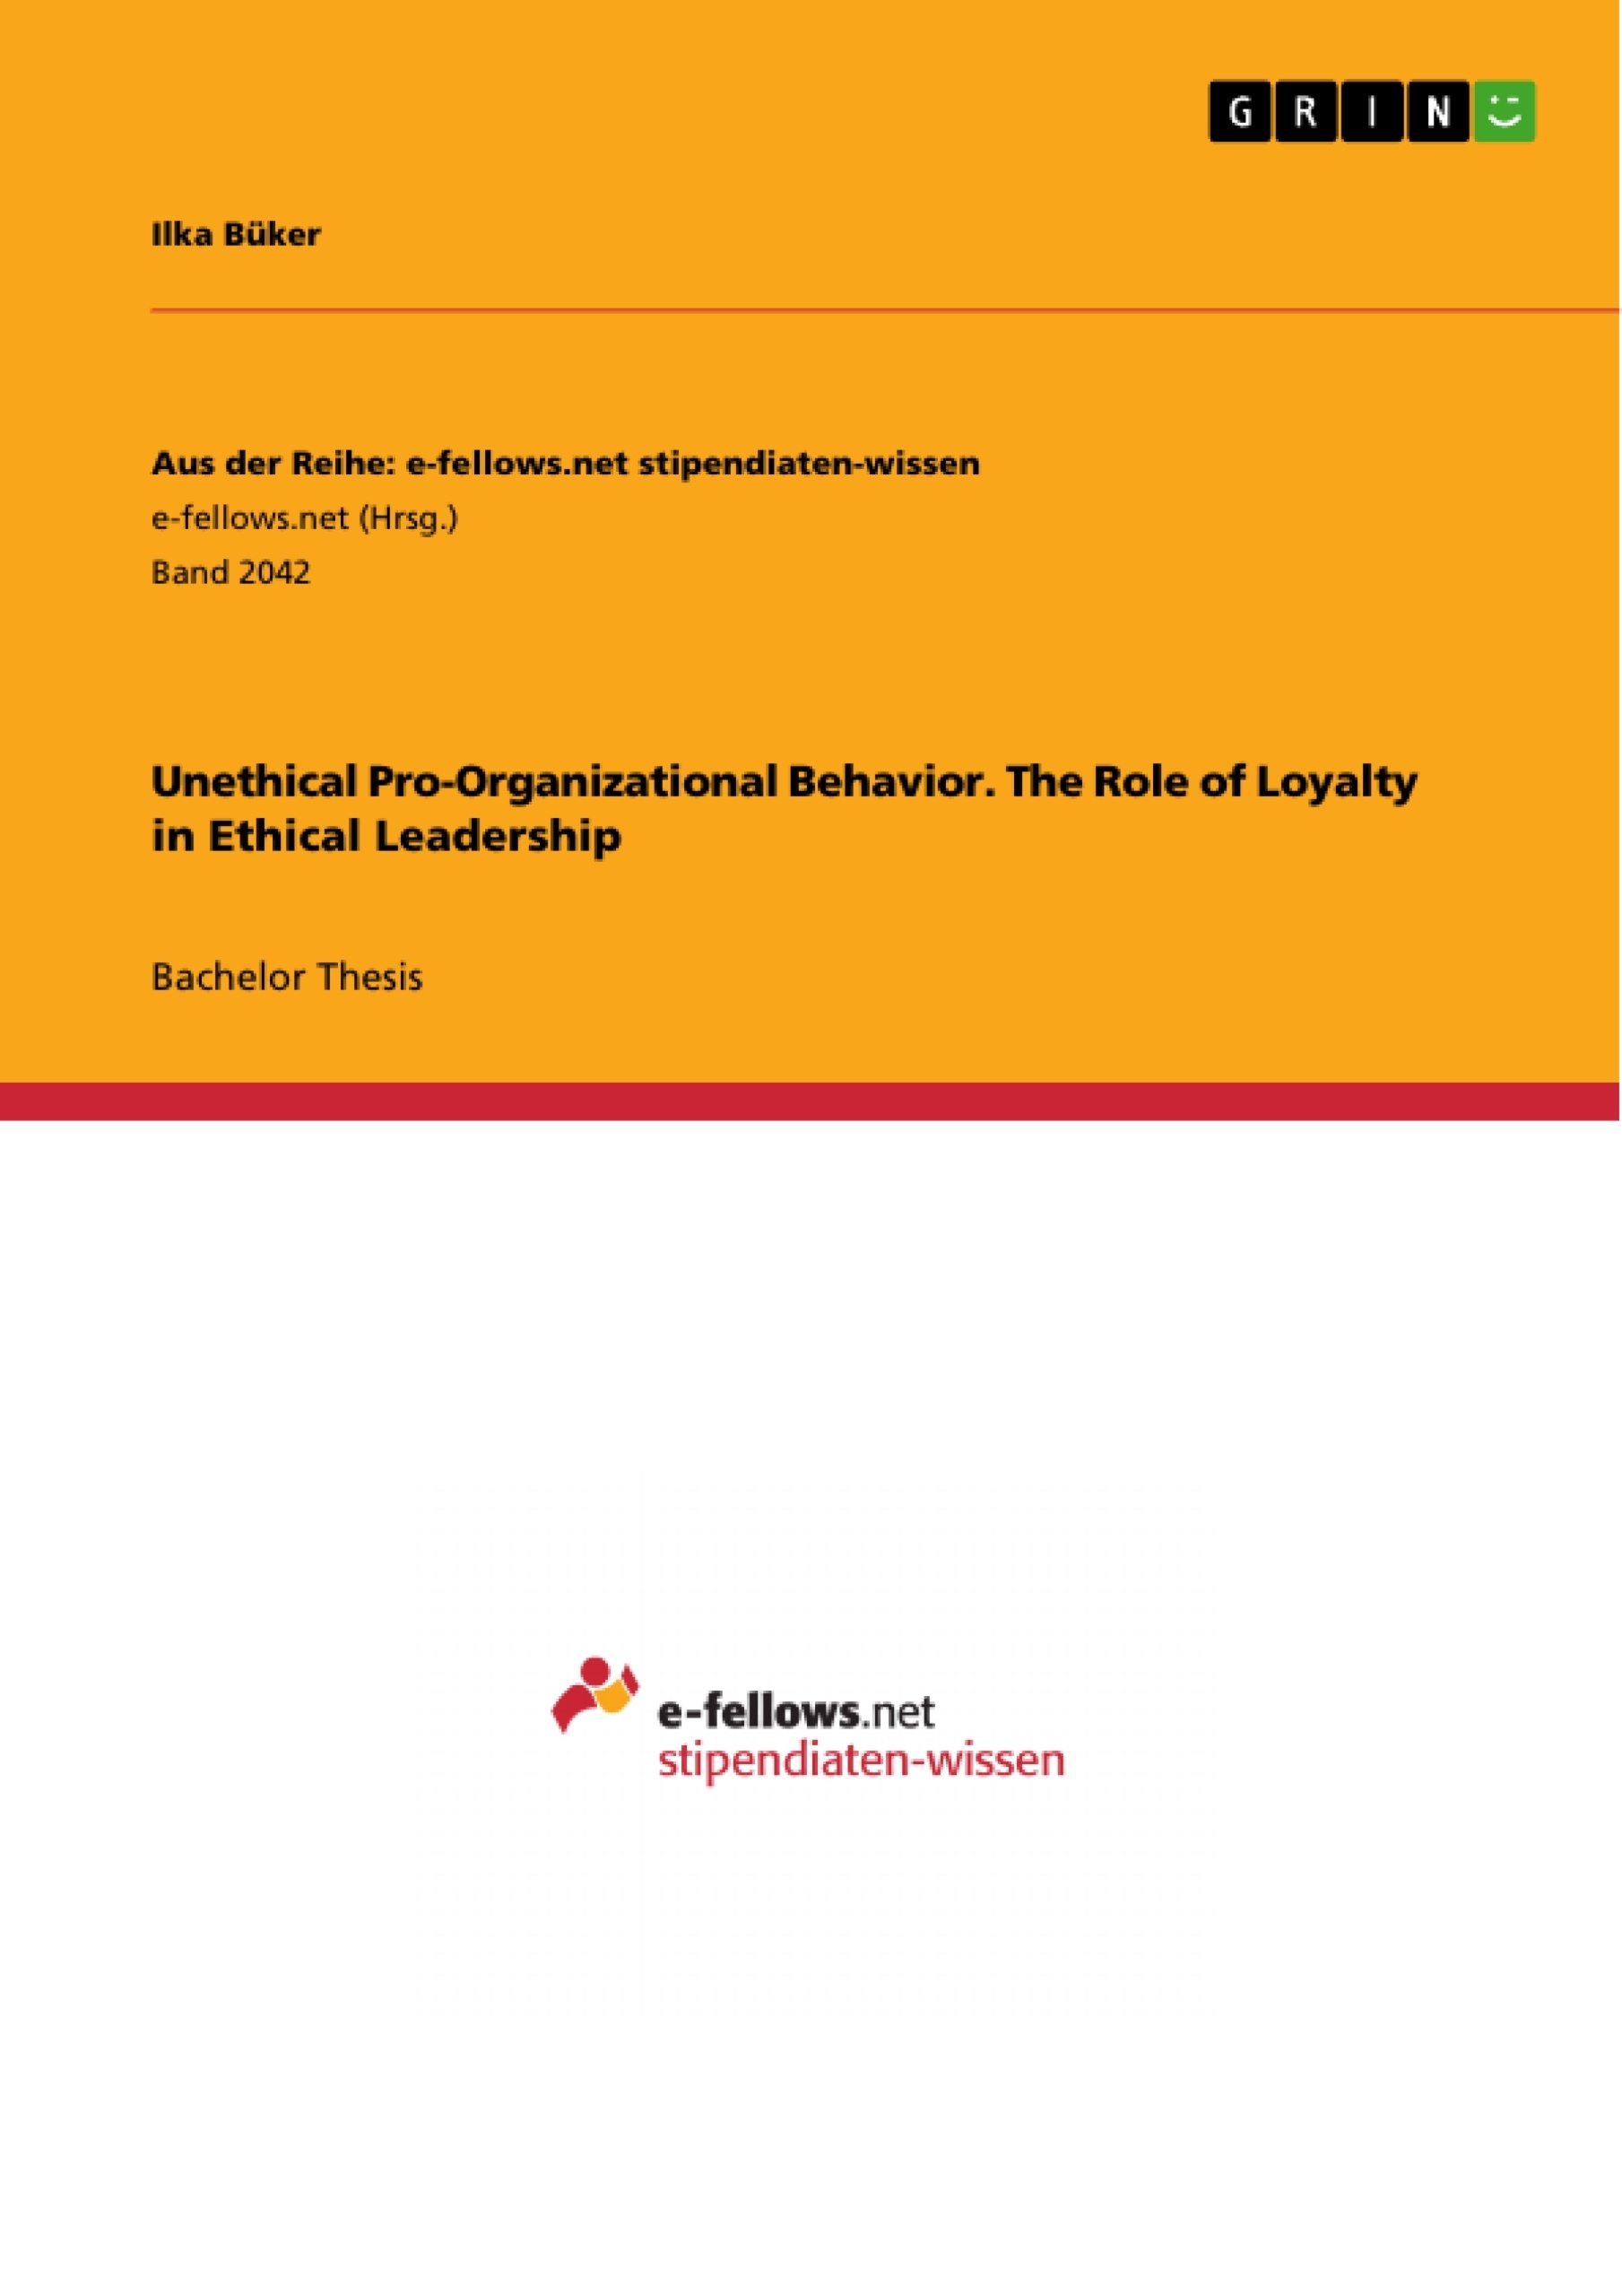 Title: Unethical Pro-Organizational Behavior. The Role of Loyalty in Ethical Leadership